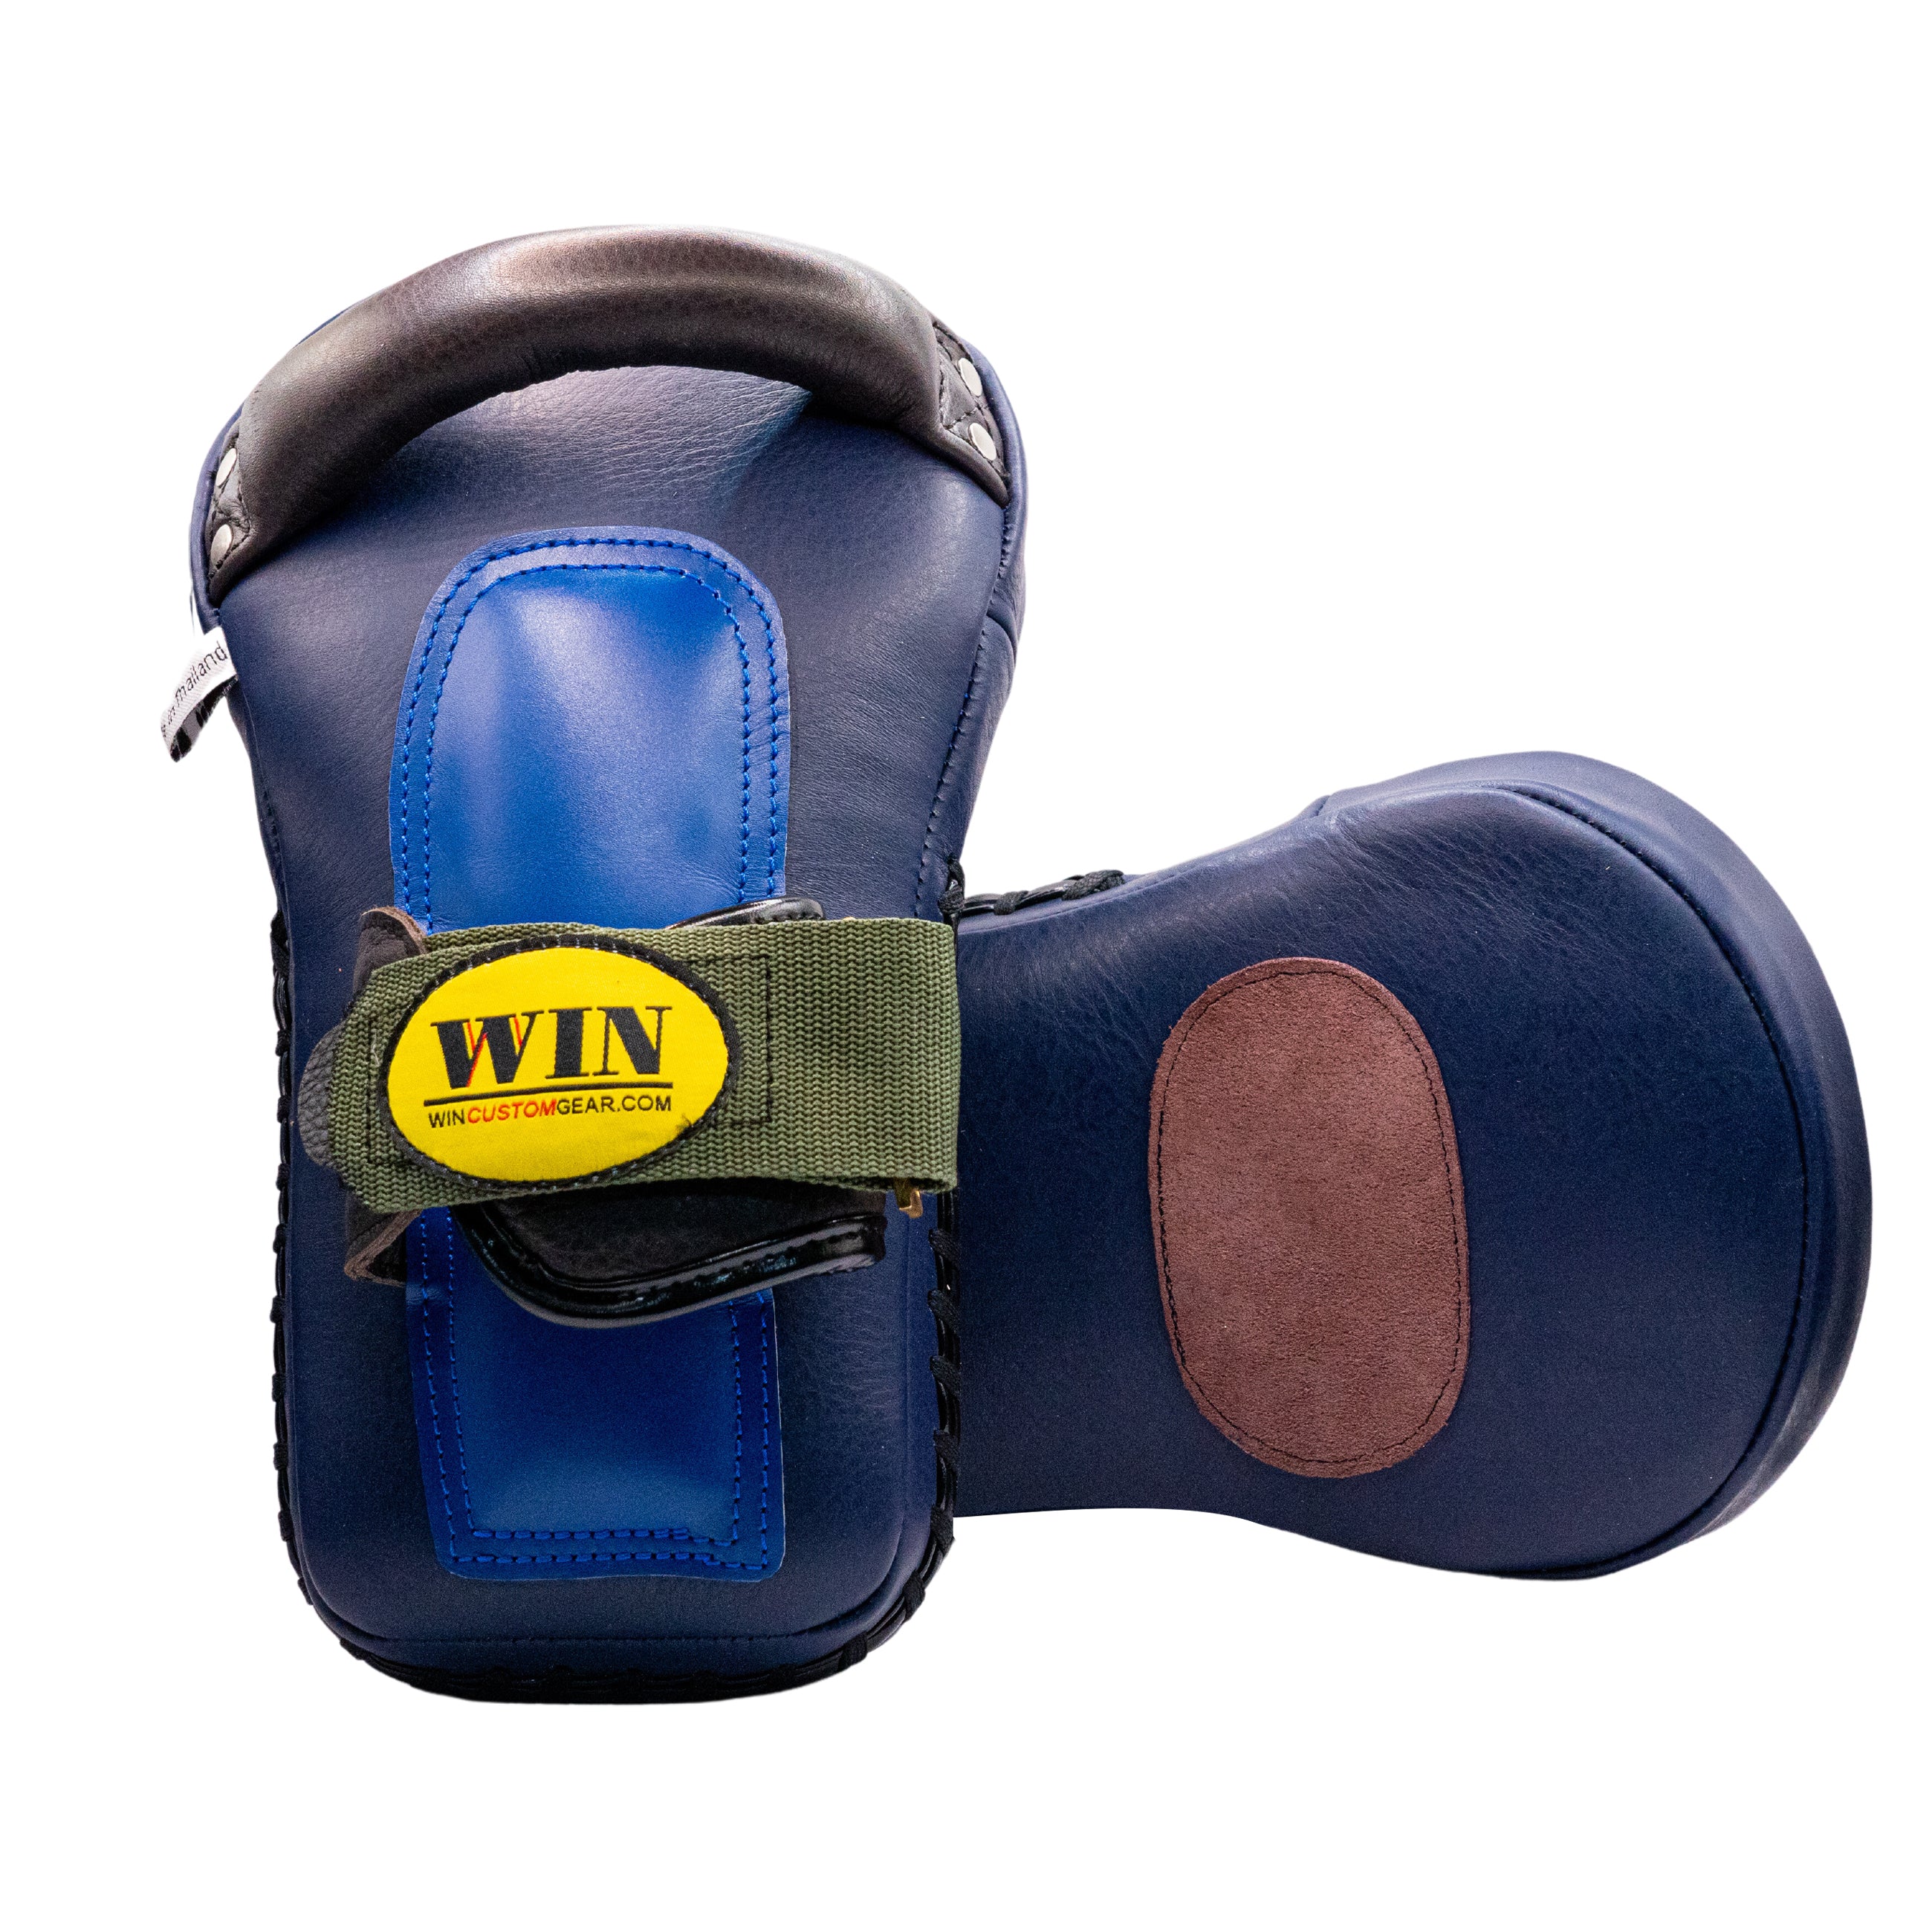 Long Sparring Focus Pads